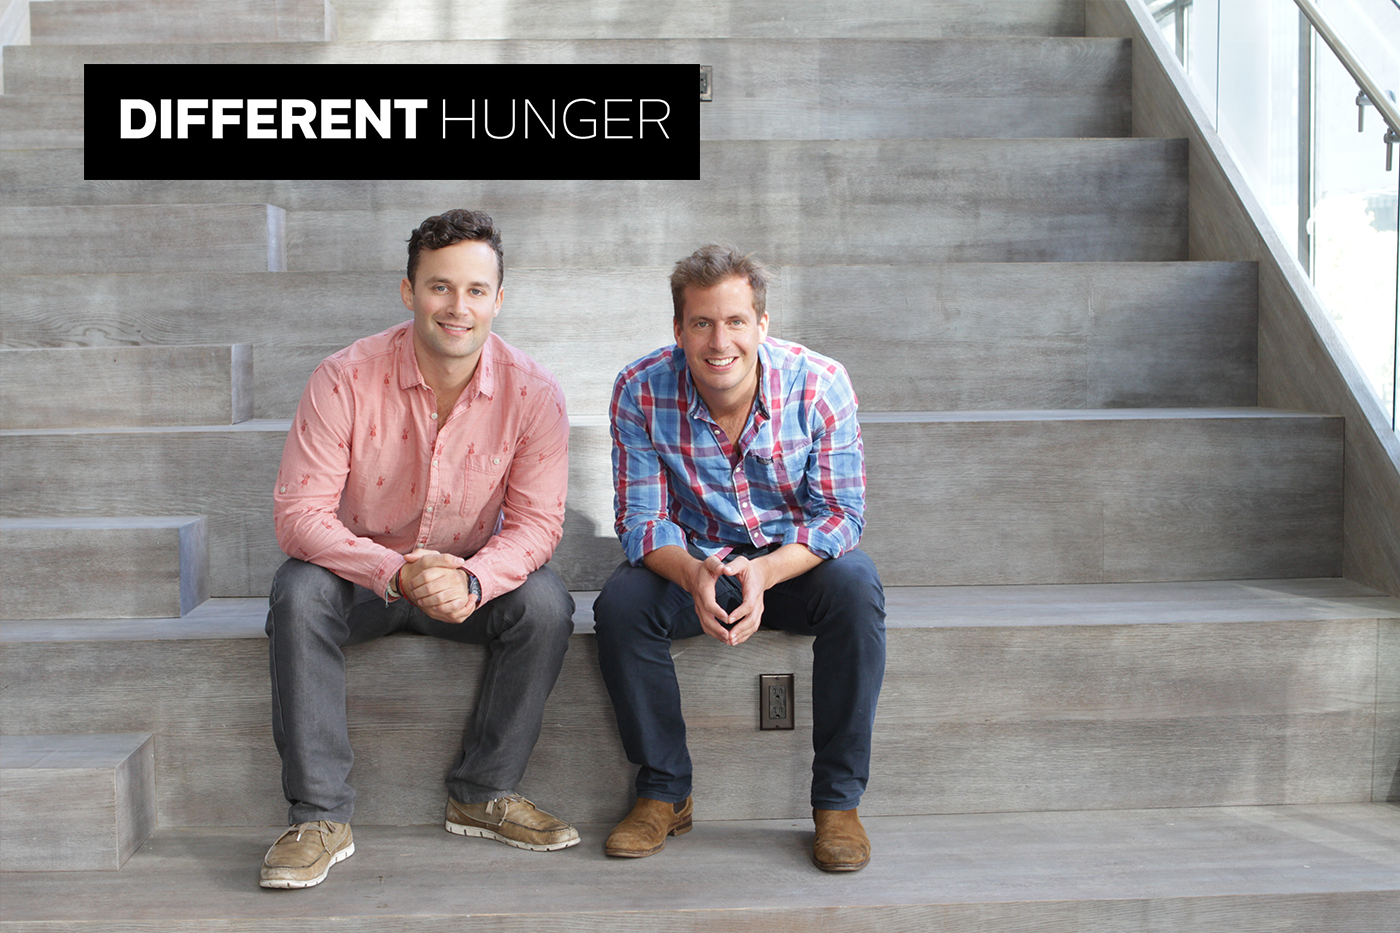 Different Hunger founders on steps